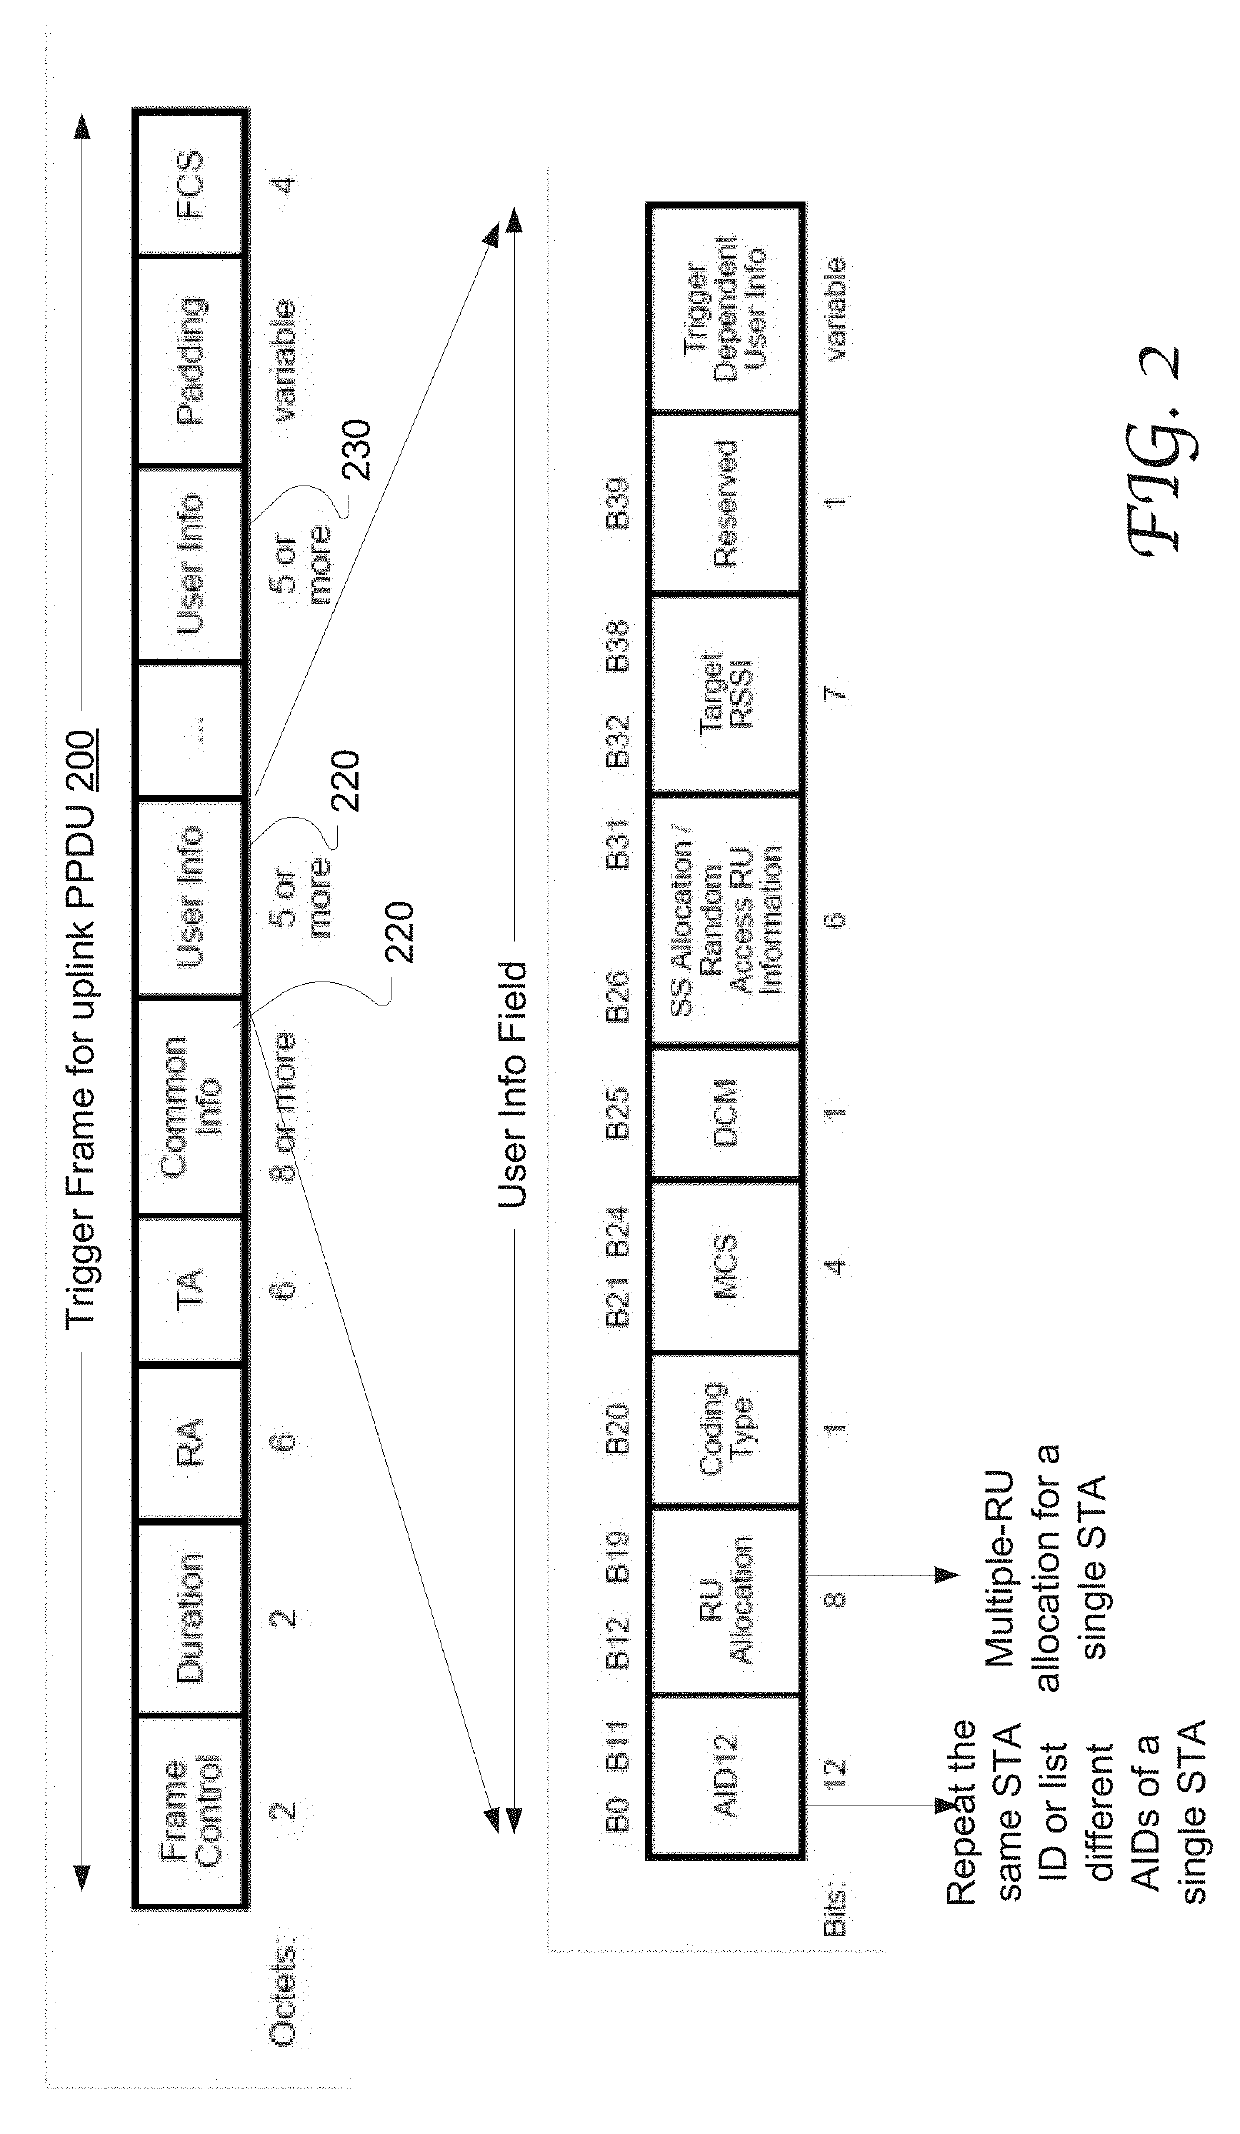 Enhanced resource unit allocation schemes for ofdma transmission in WLAN